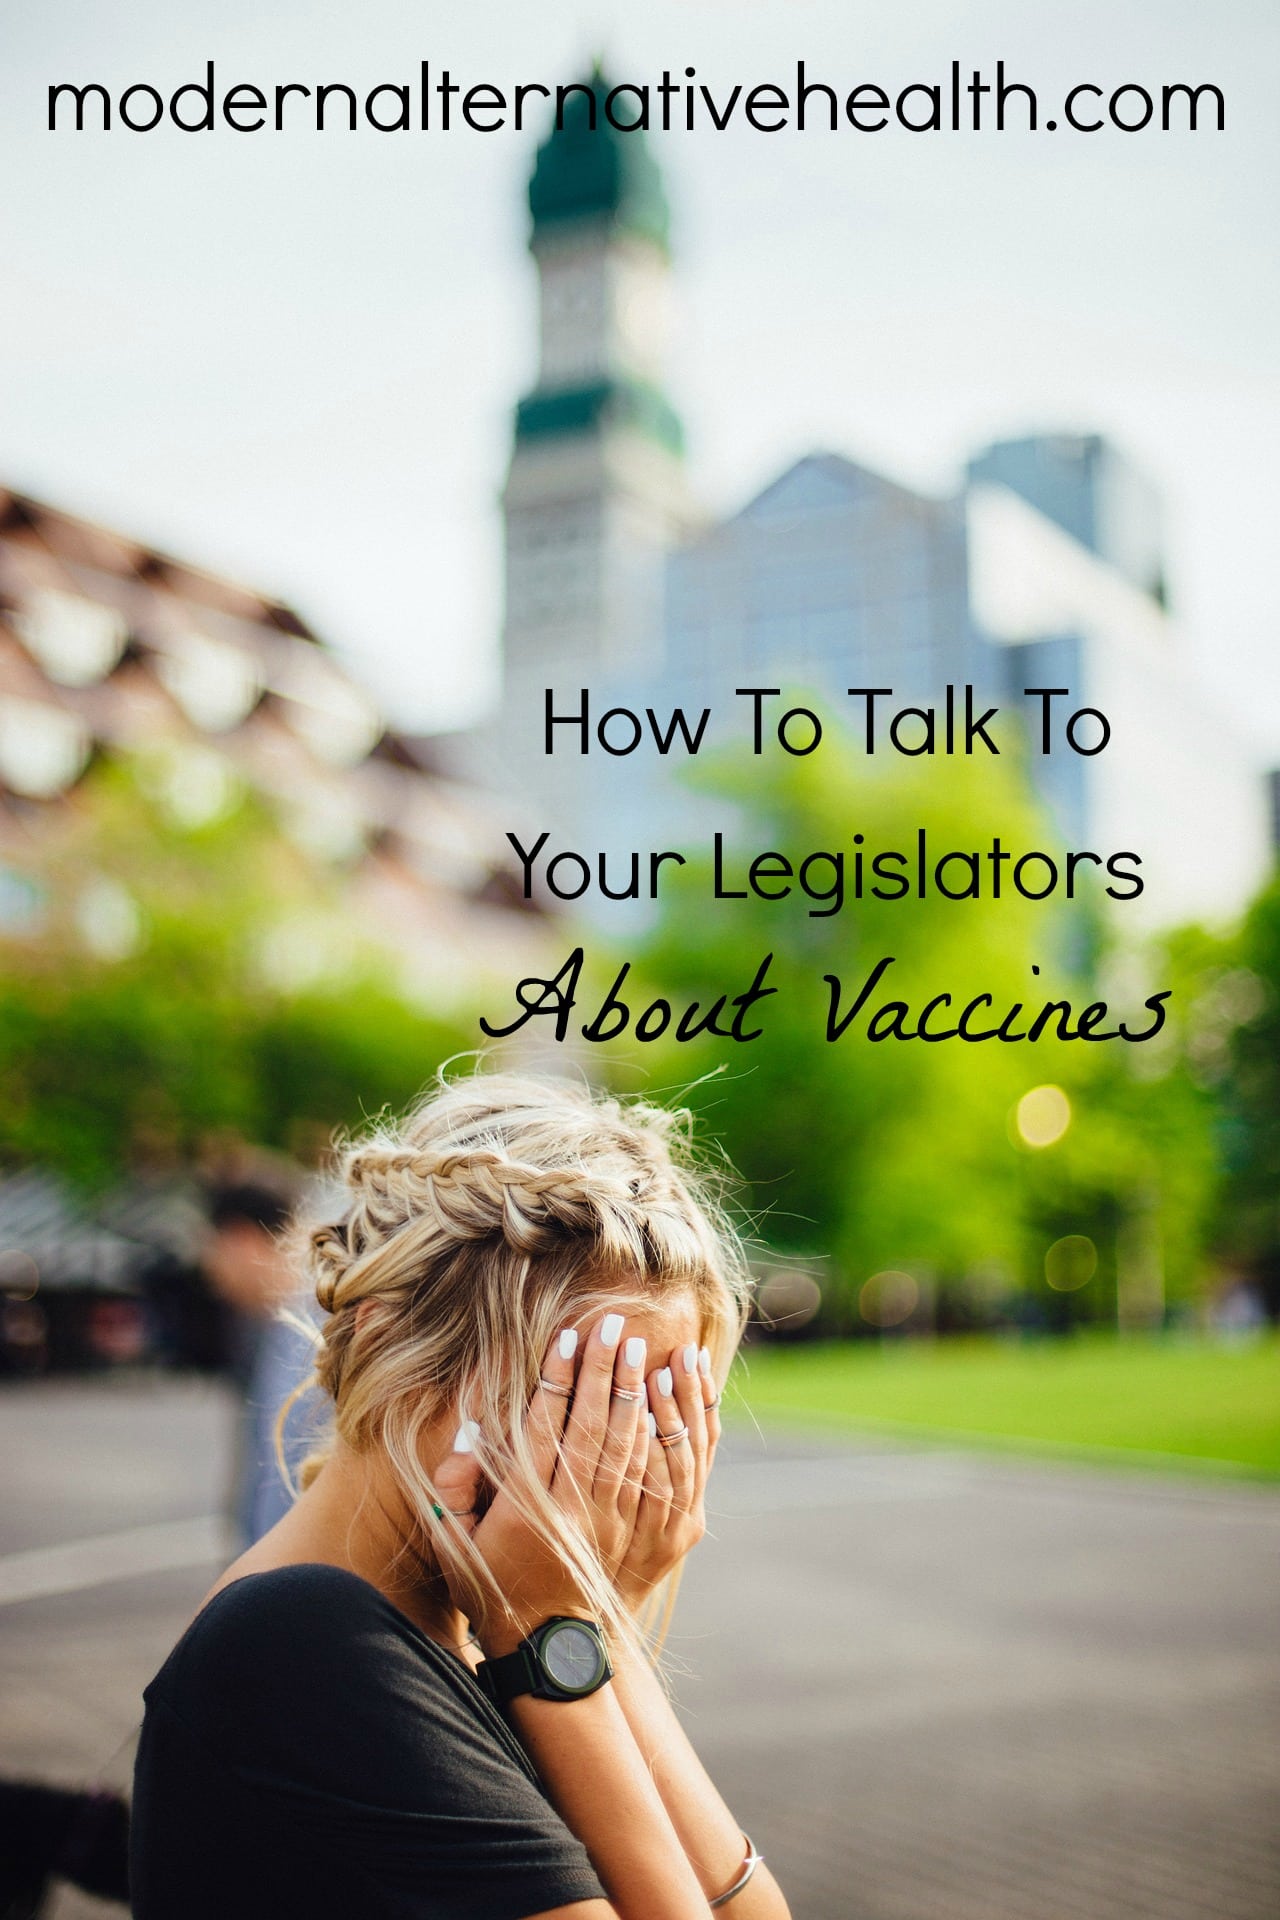 How To Talk To Your Legislators About Vaccines